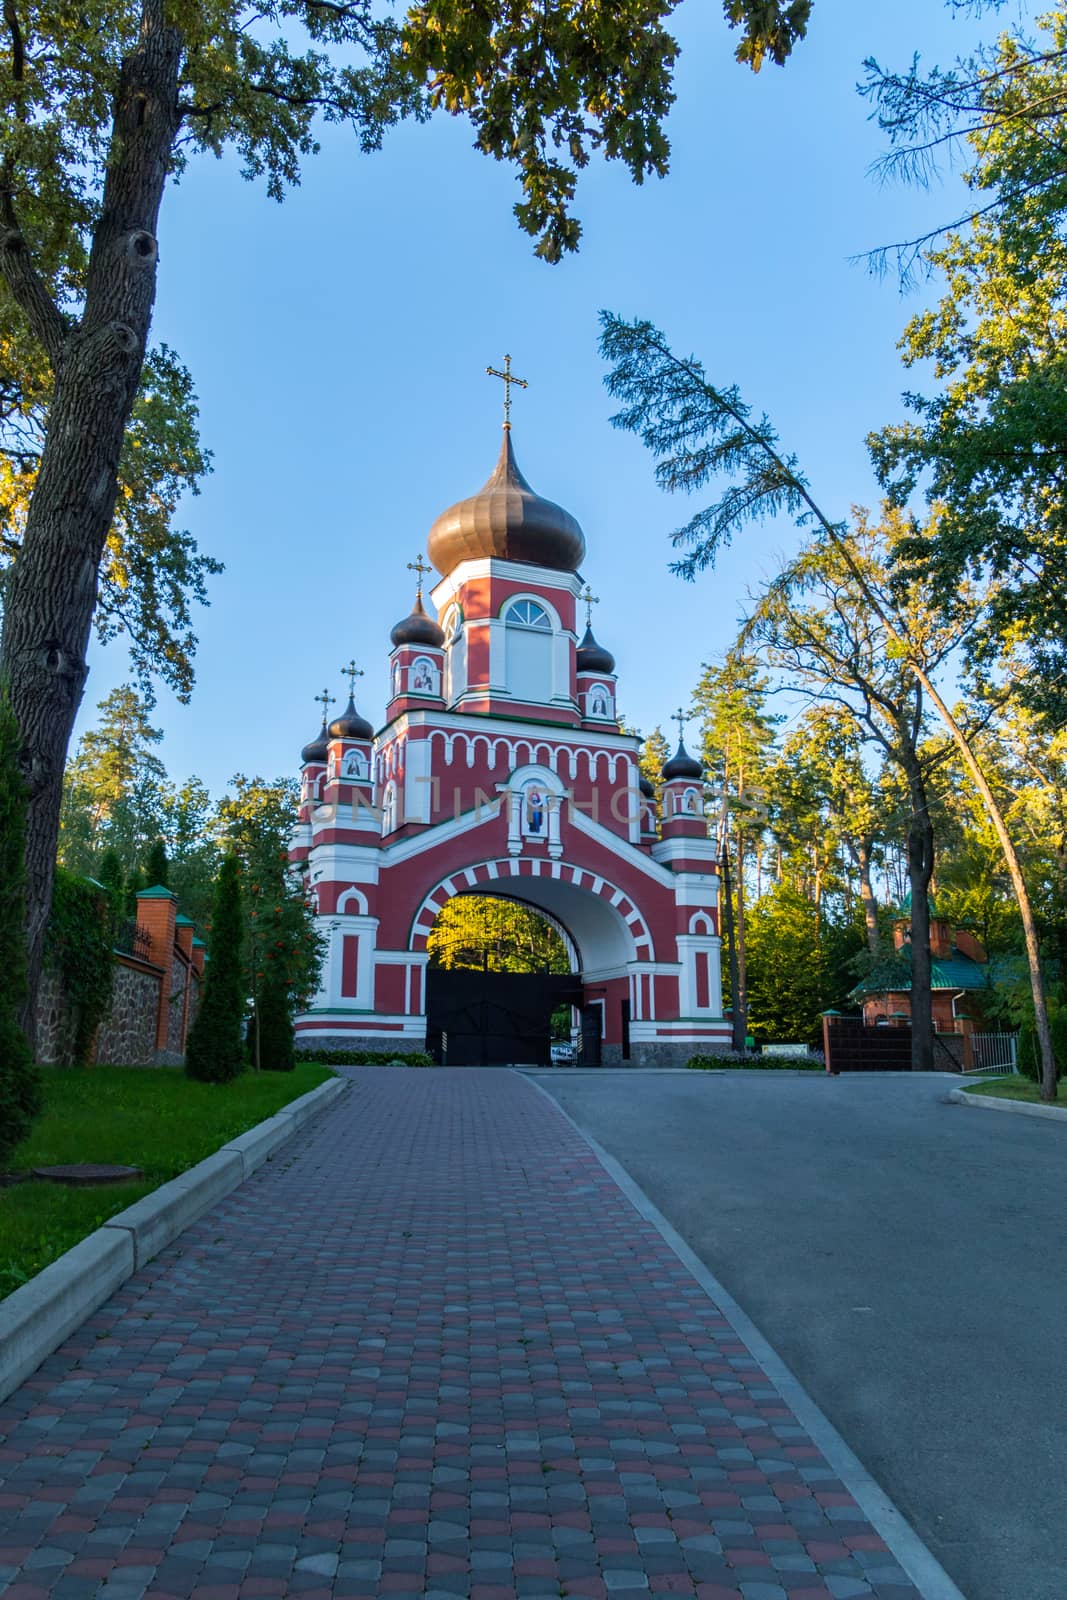 The road leading to the entrance with an arch and domes on the territory of the church parish is located behind the fence. With tall trees growing there. by Adamchuk